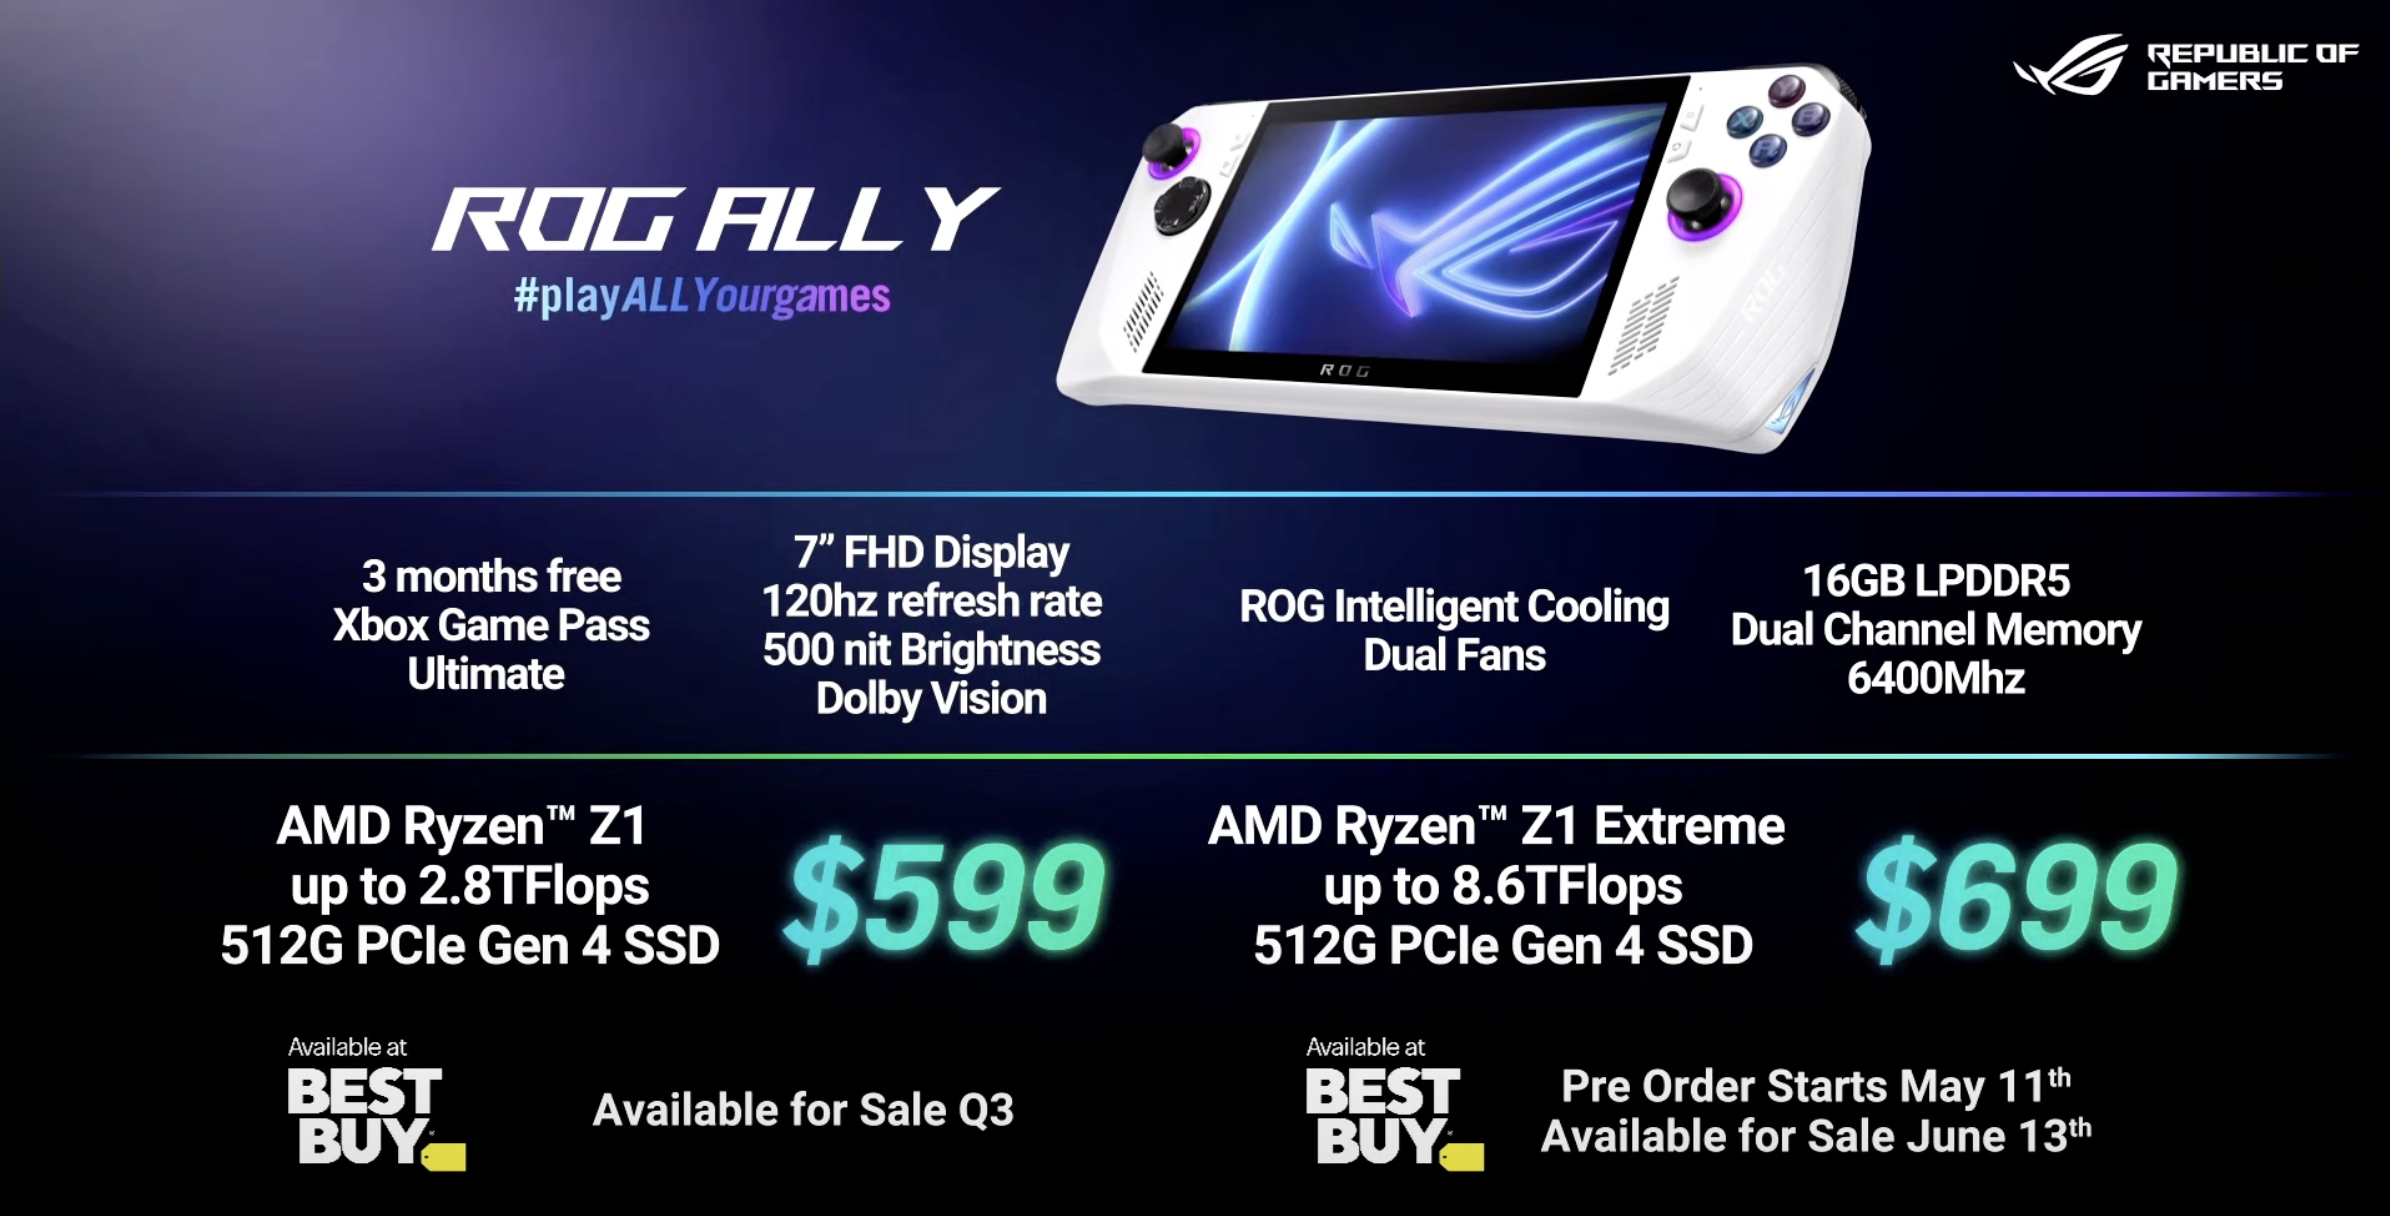 ASUS ROG Ally packs AMD's new Z1 chip and launches May 11